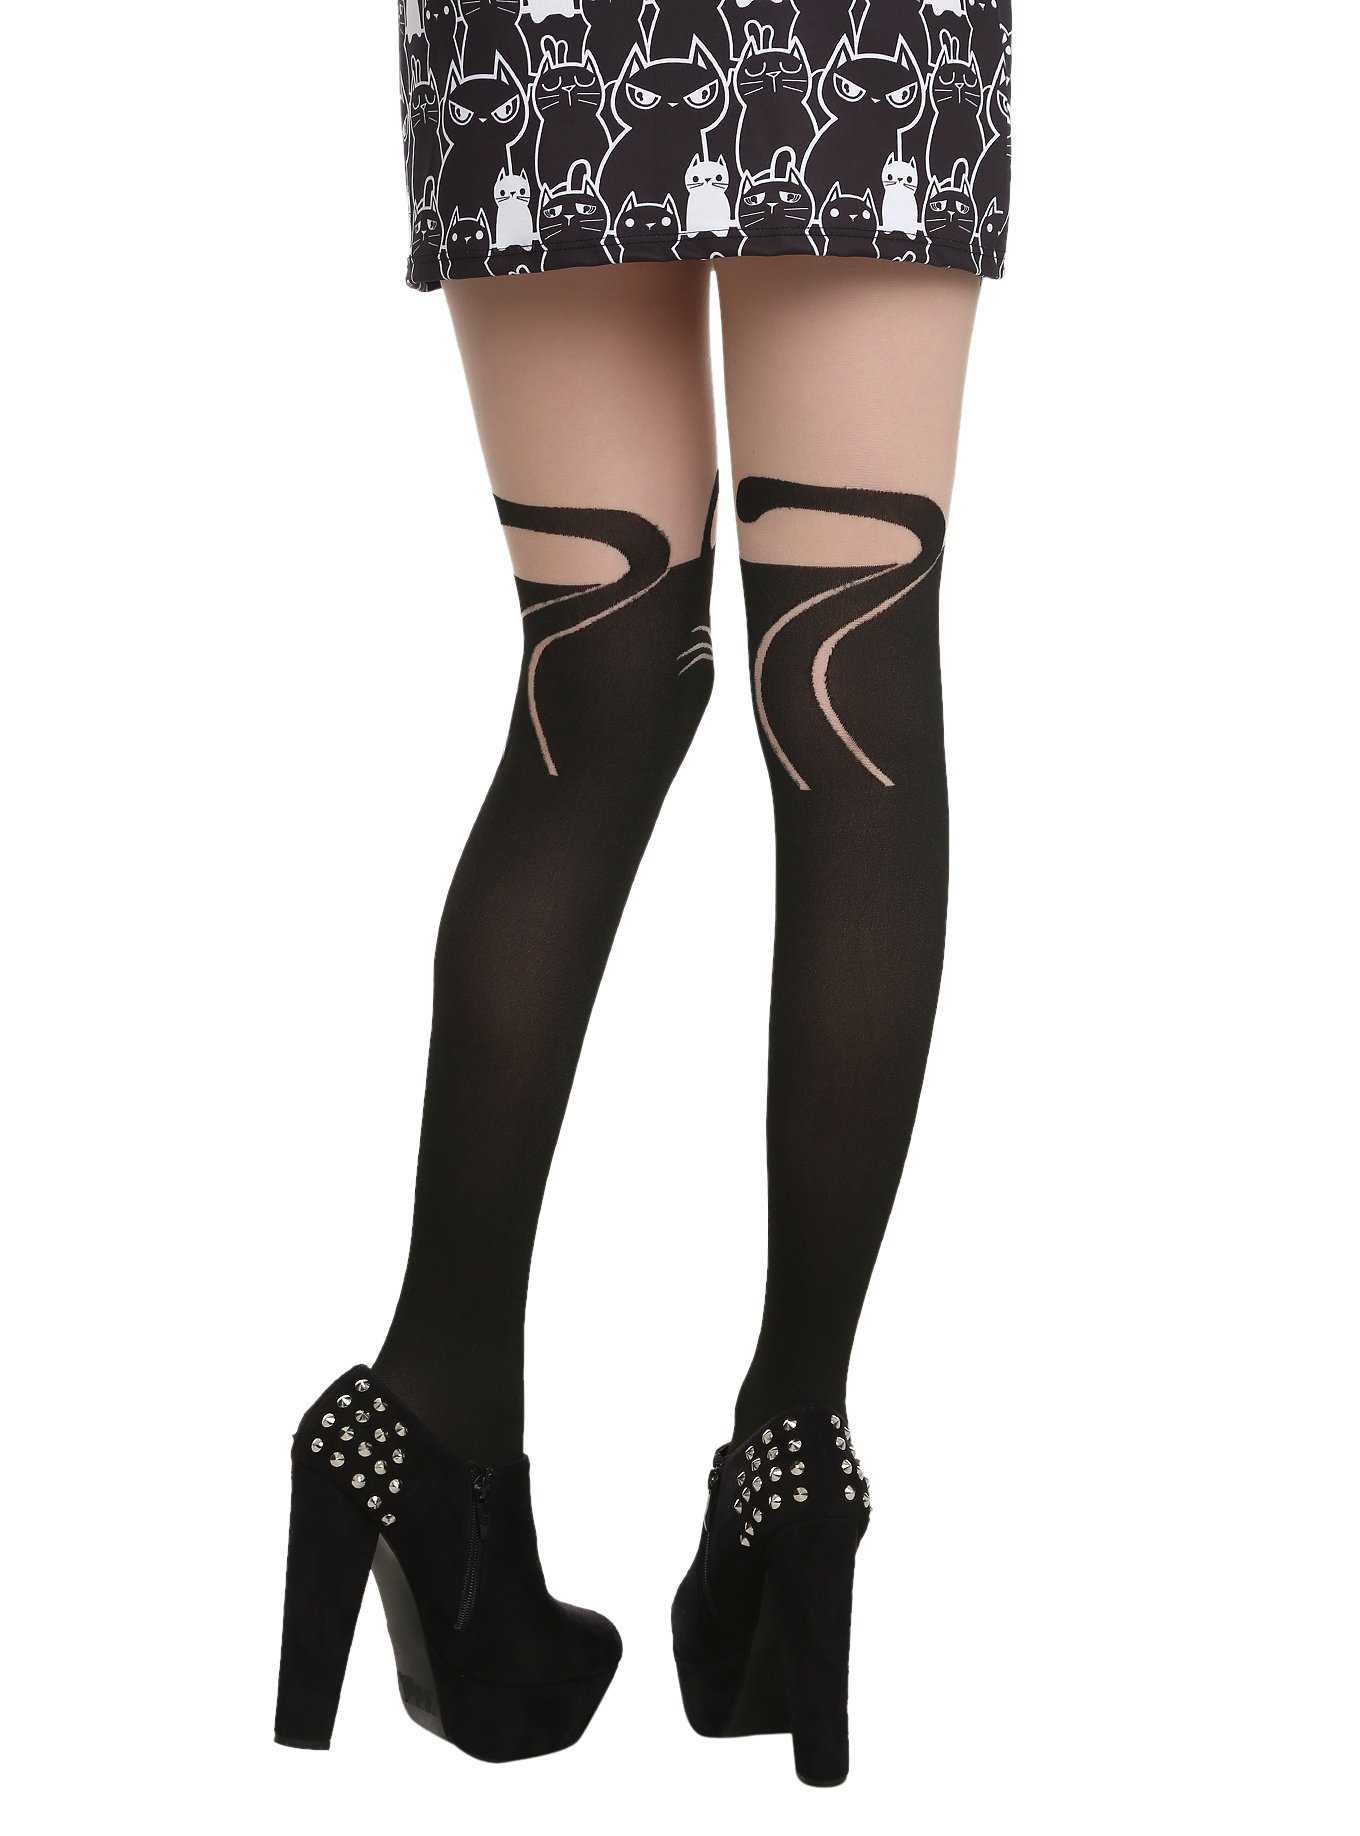 Item of the day: Batman tights from Hot Topic - A Cornish Geek